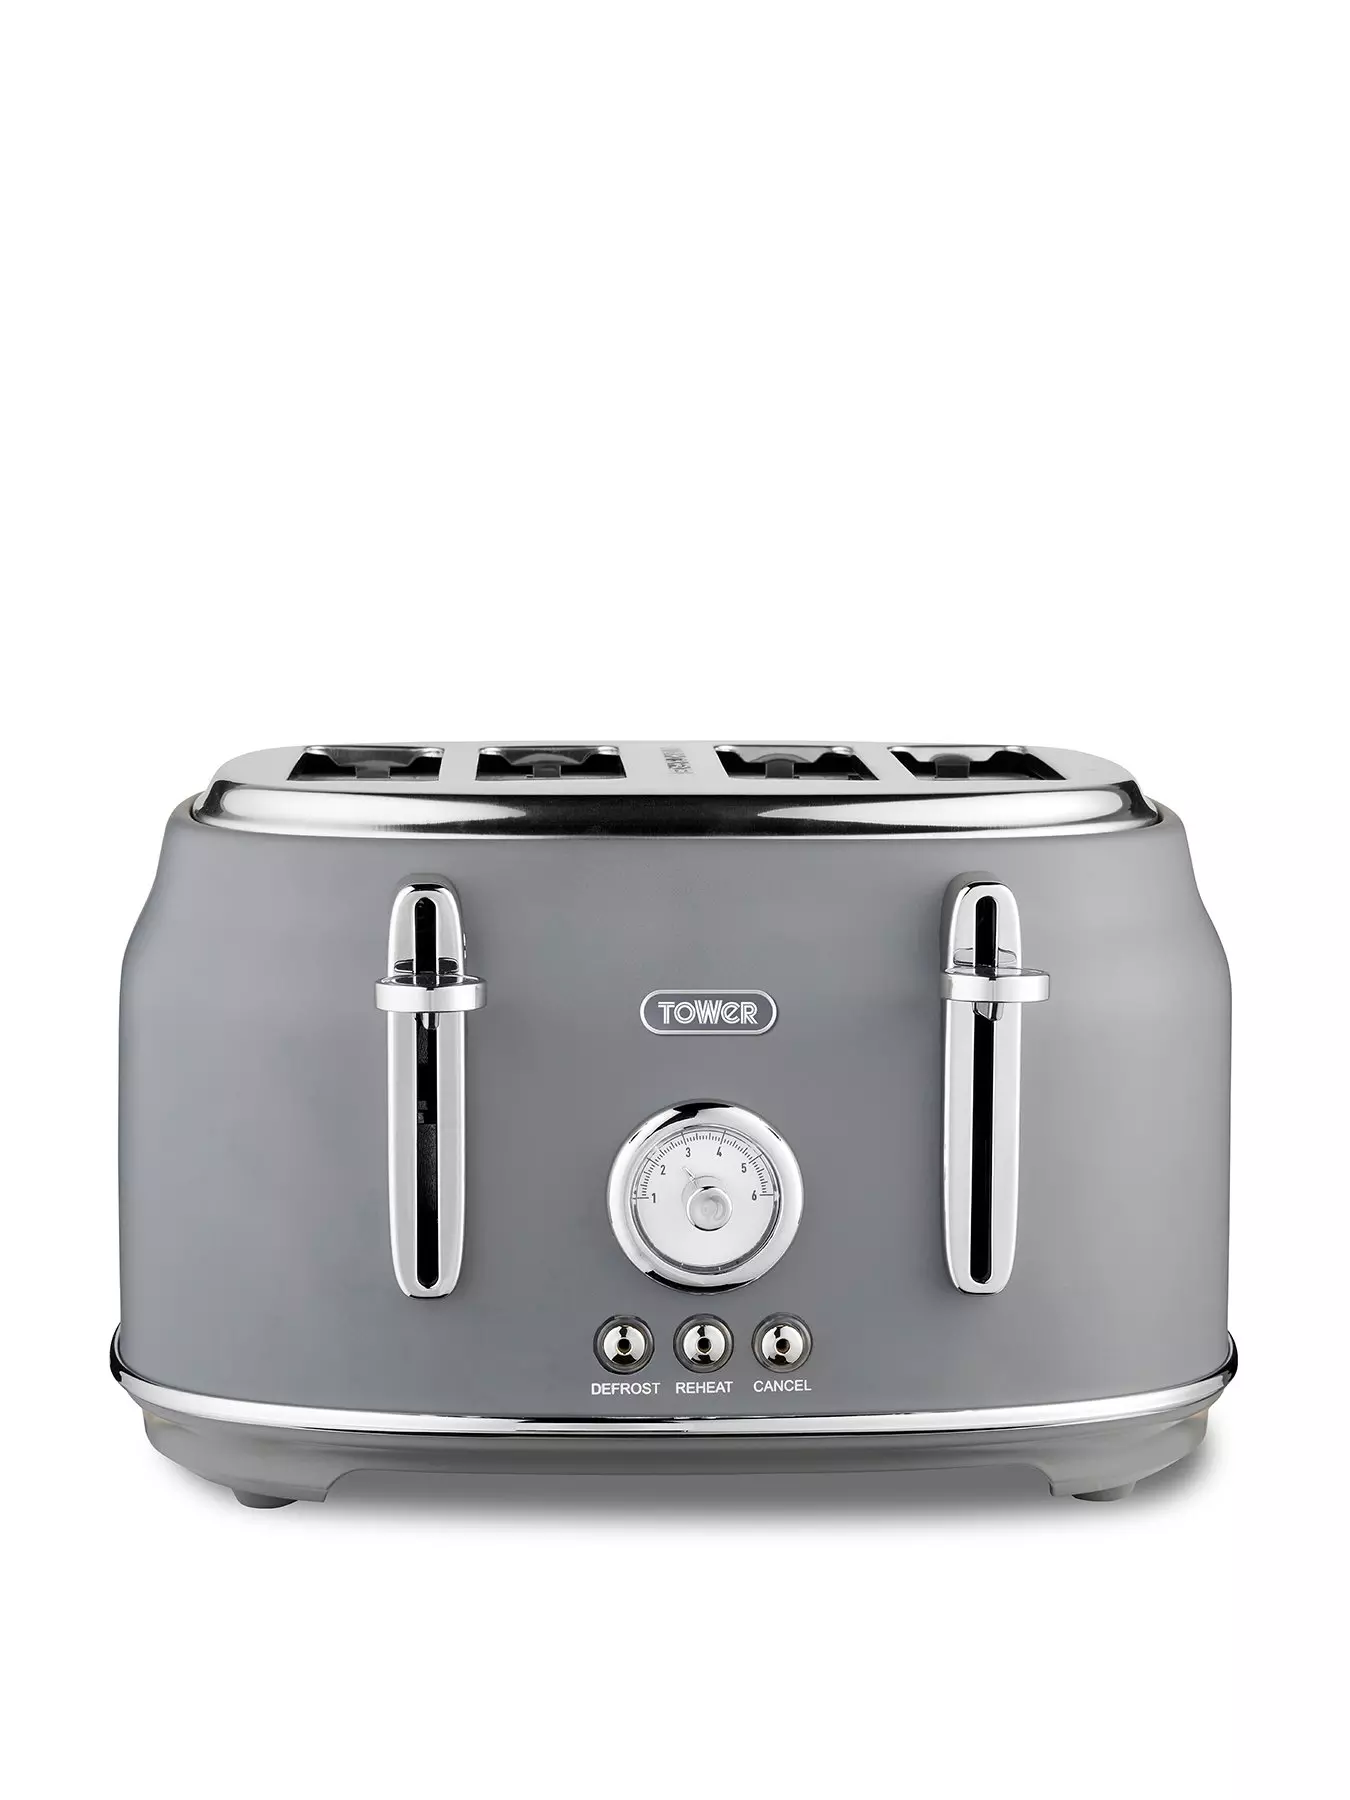 Home Shark 4 Slice Toaster, Stainless Steel Toaster with 7 Shade Settings,  Extra Wide Slots for Bagels, Silver 